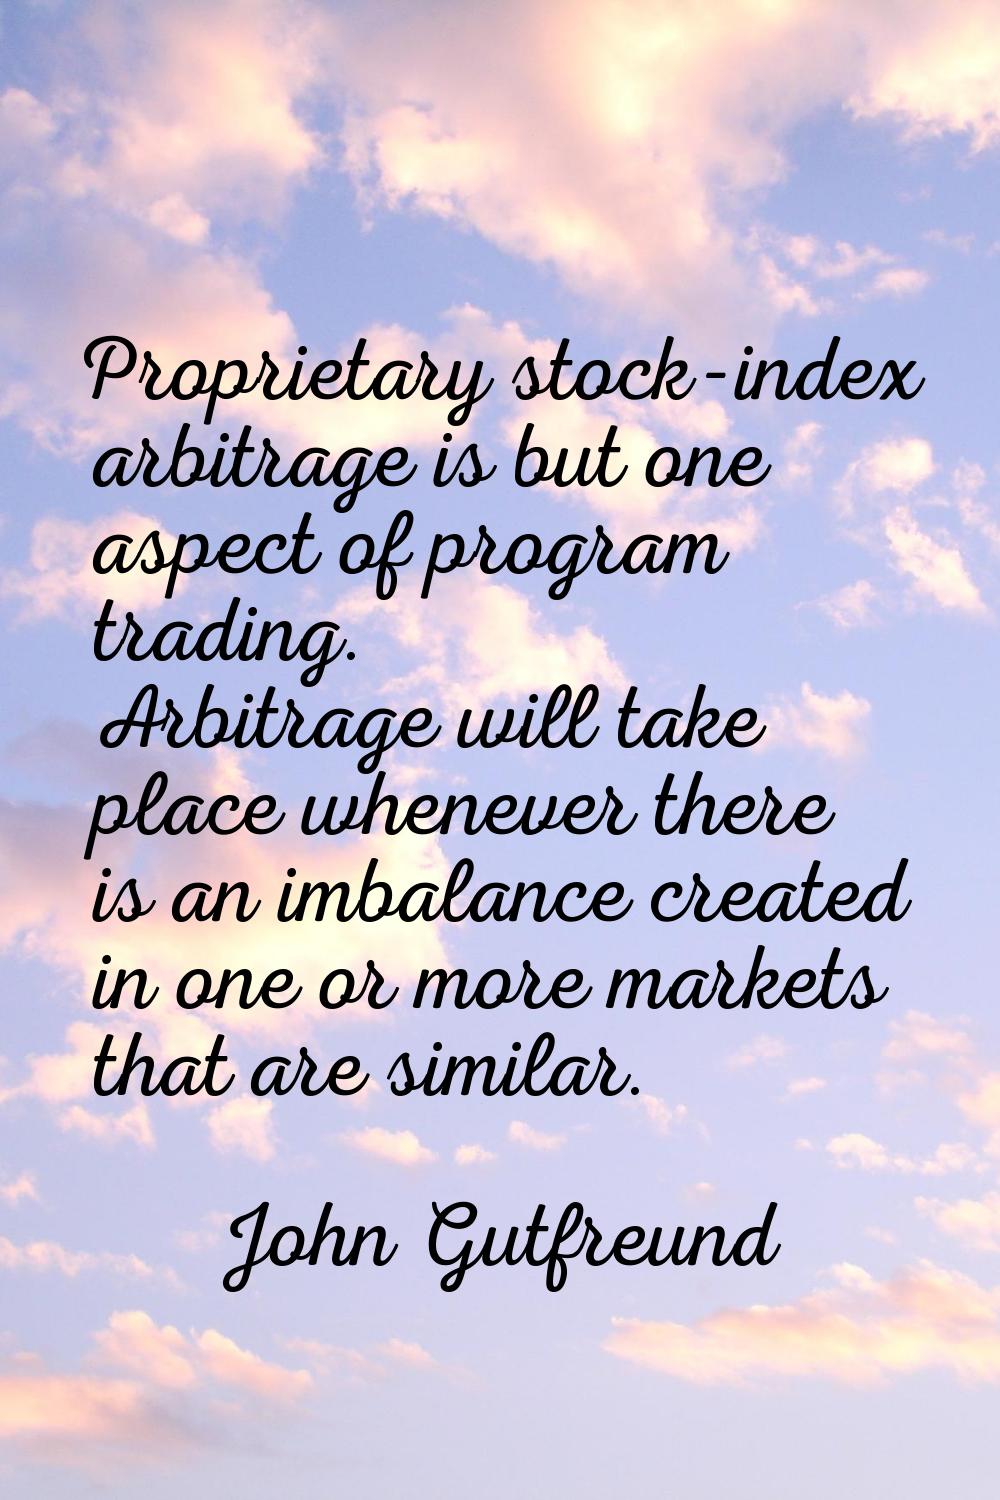 Proprietary stock-index arbitrage is but one aspect of program trading. Arbitrage will take place w